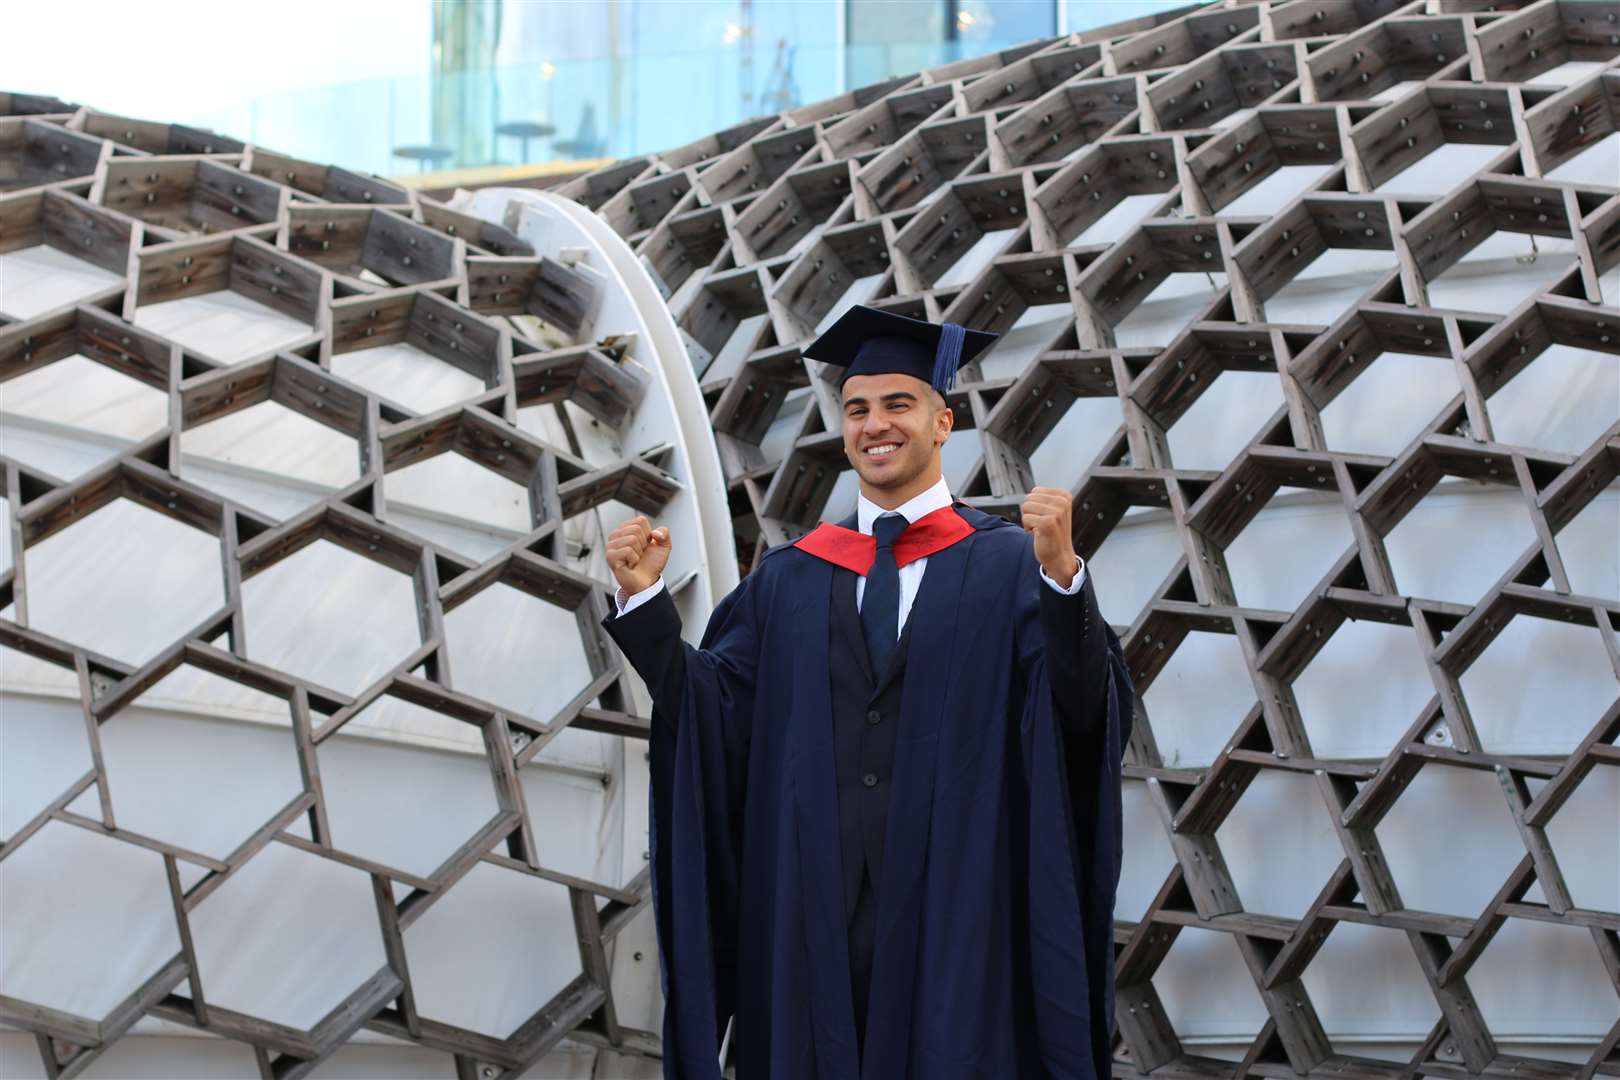 Adam Gemili jetted in from a Qatar training camp for his graduation ceremony in London.